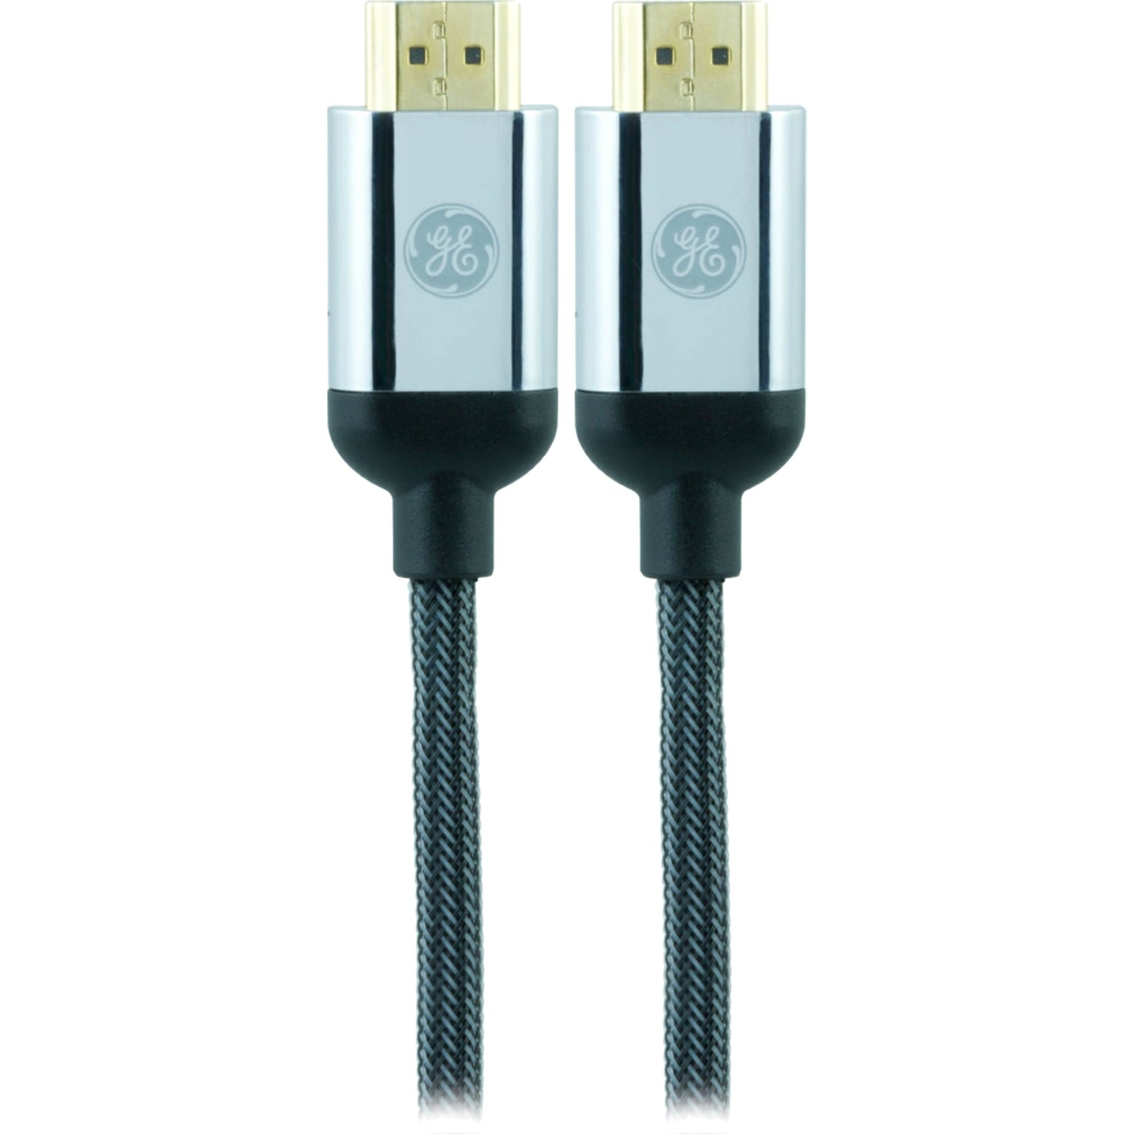 GE UltraPro Premium Braided 4 ft. 4K HDMI Cable - Image 3 of 4